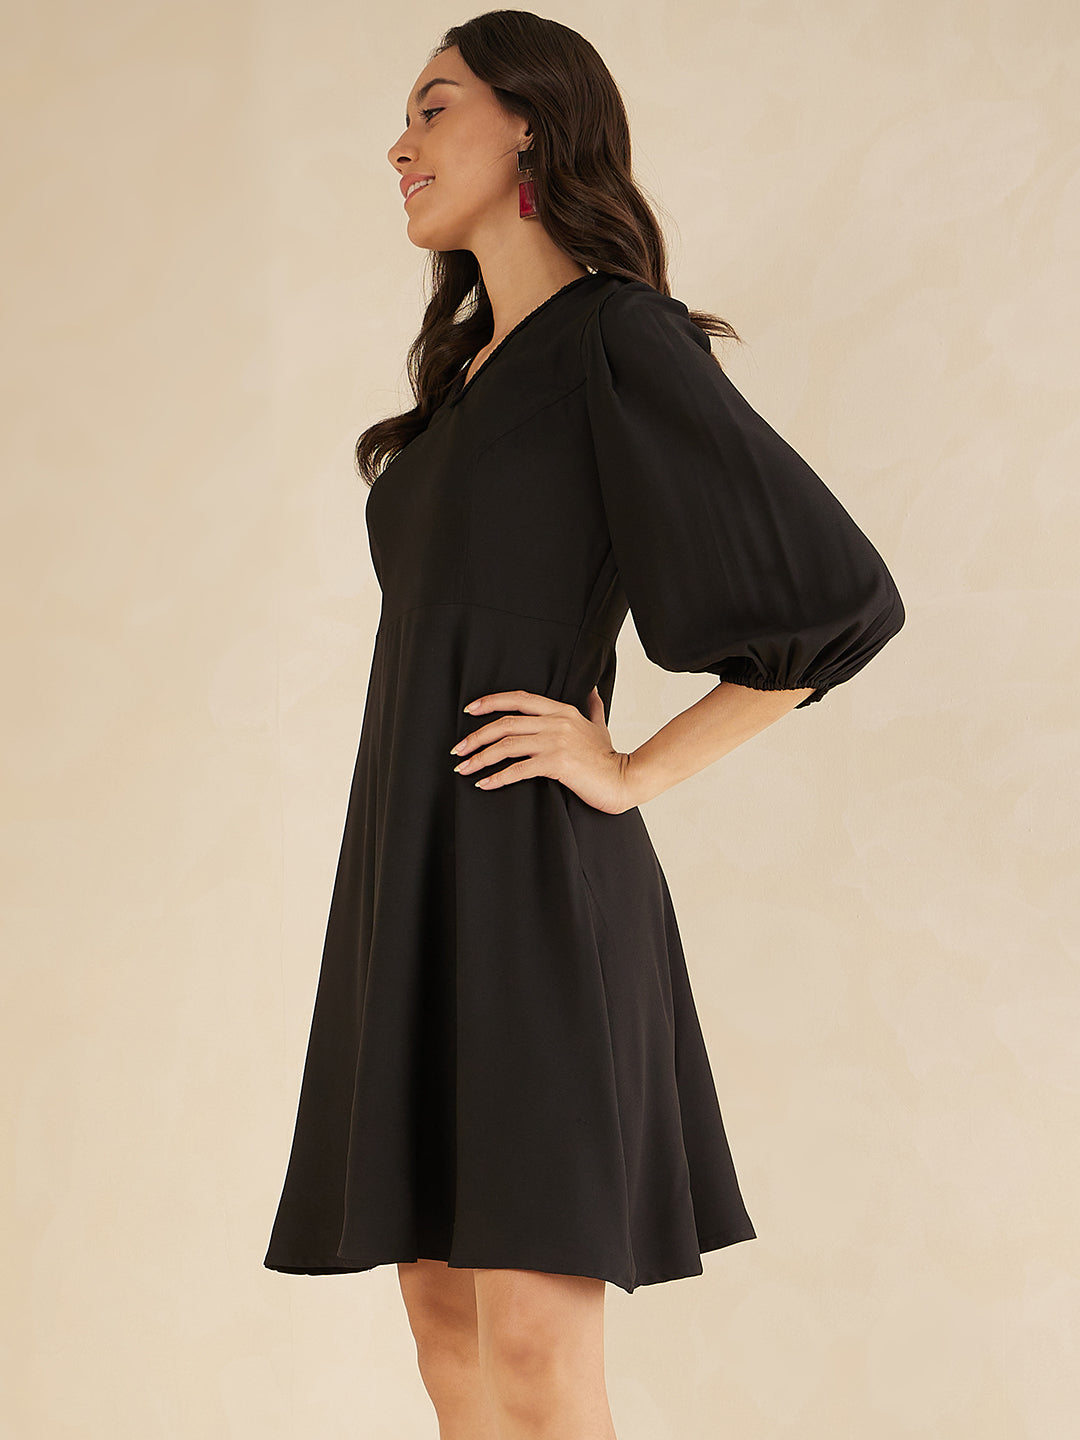 Black Fit And Flare Knee Length Dress